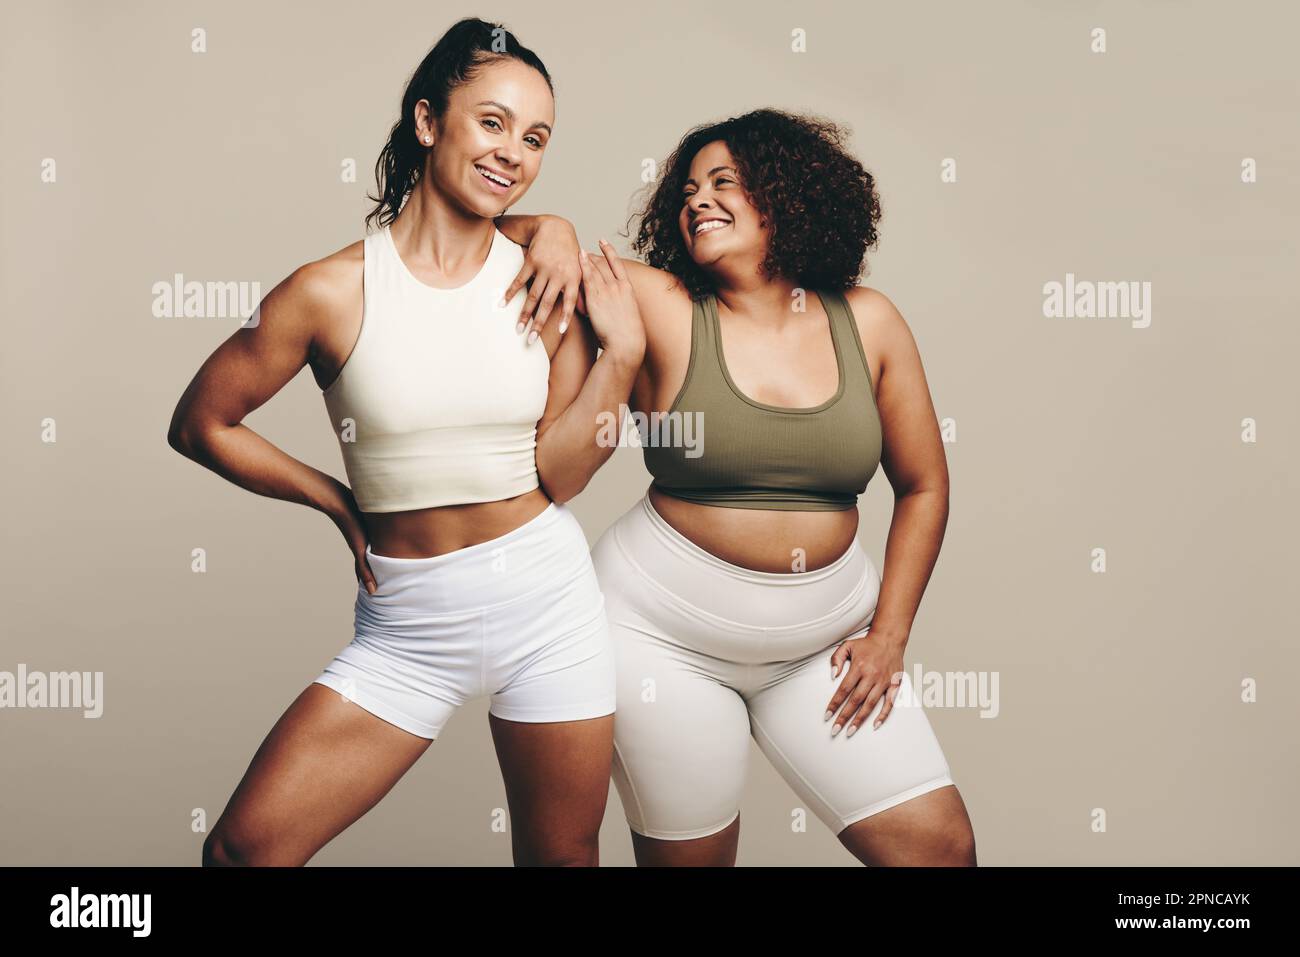 Sports women of different body types stand side by side, wearing